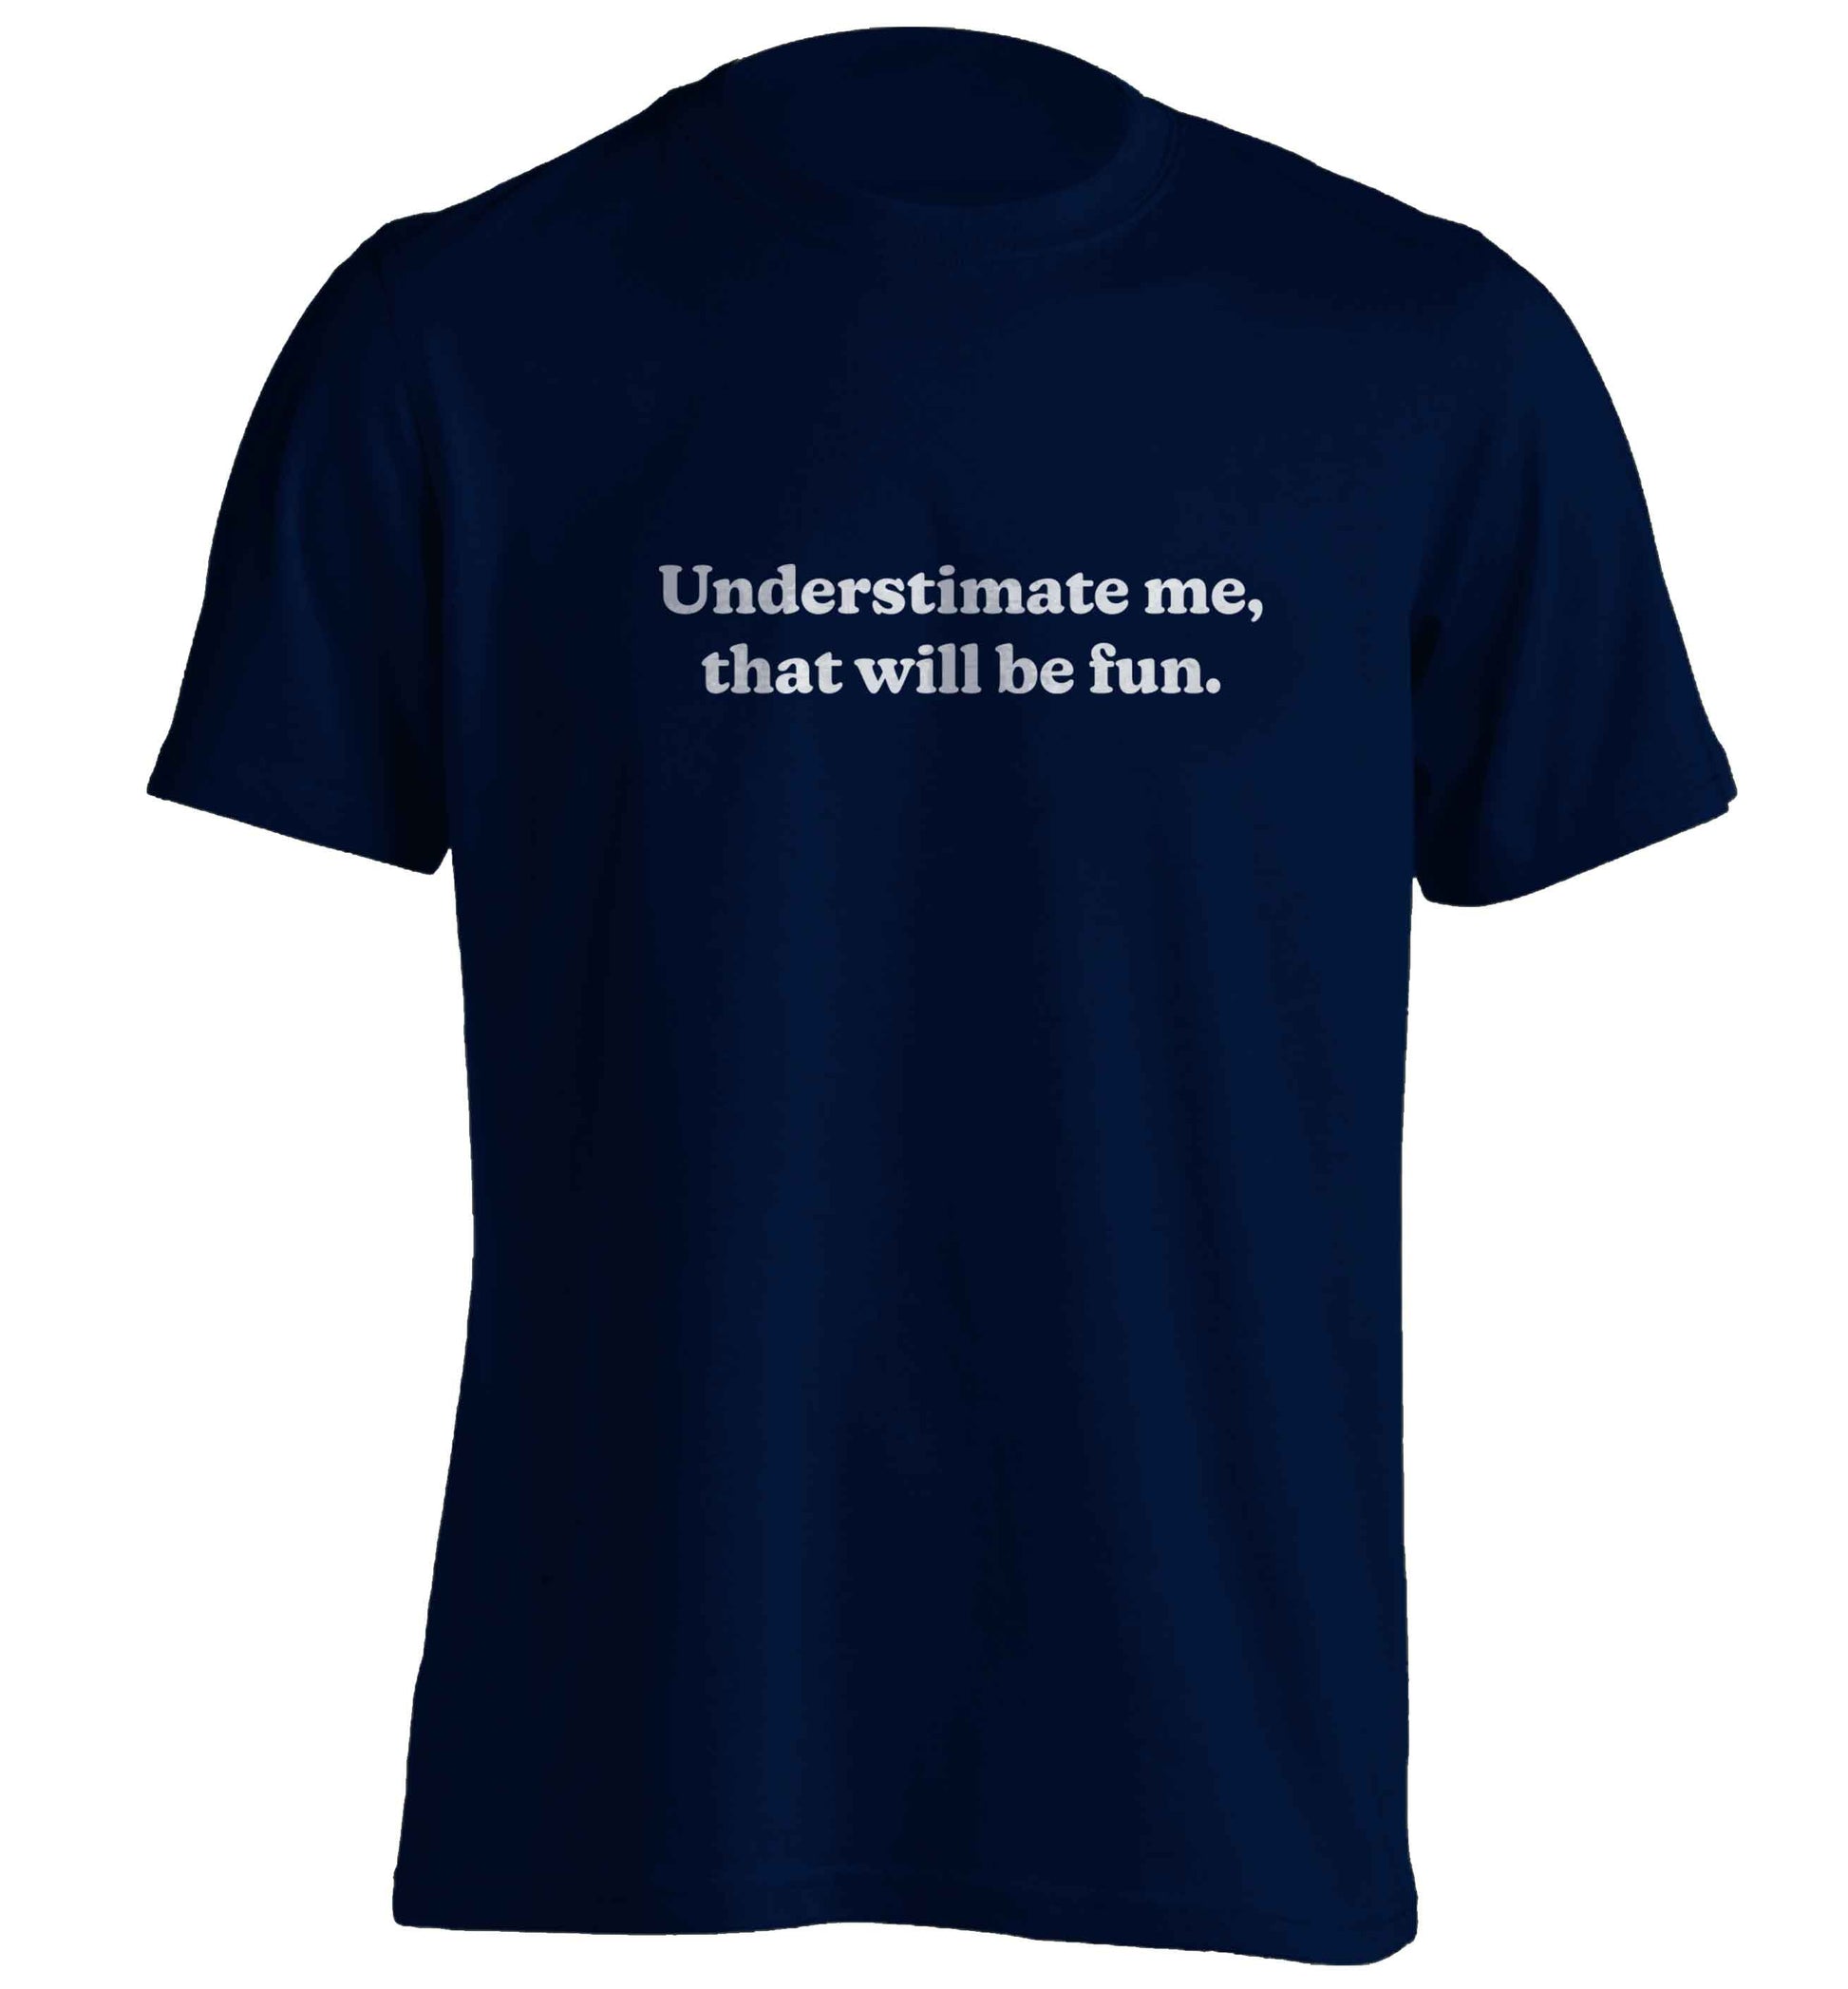 Underestimate me that will be fun adults unisex navy Tshirt 2XL